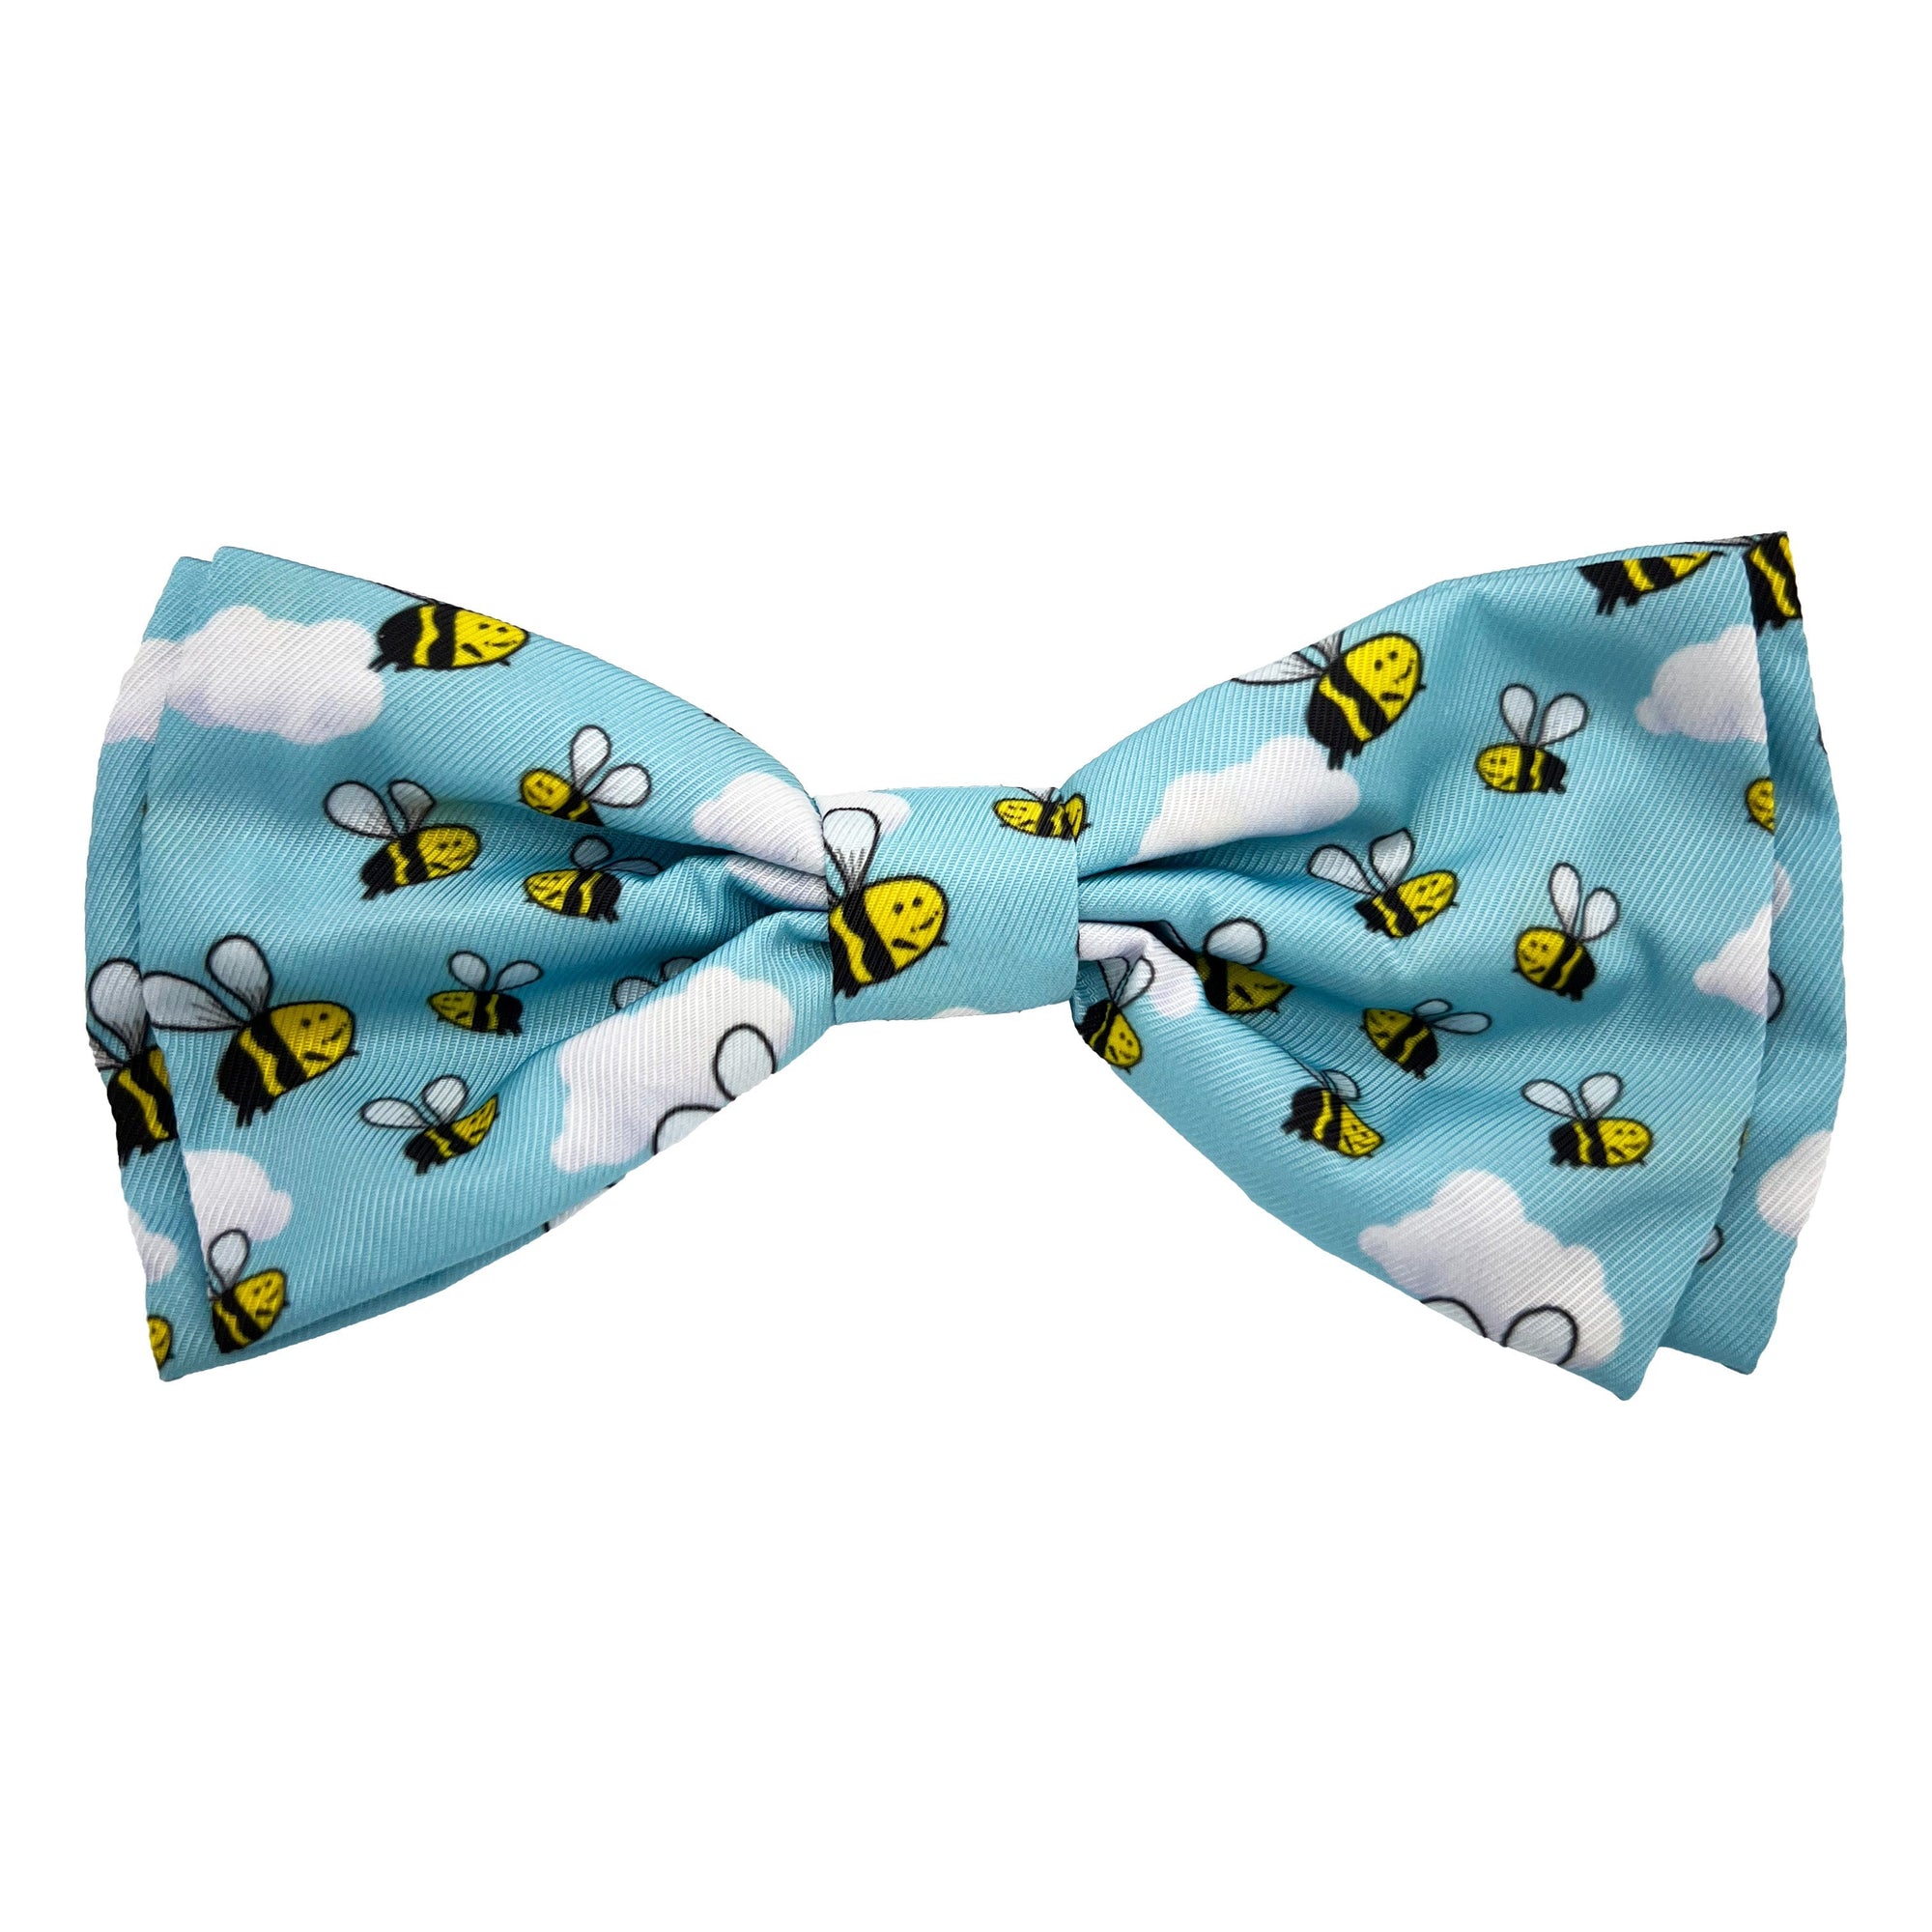 Busy Bees Bow Tie